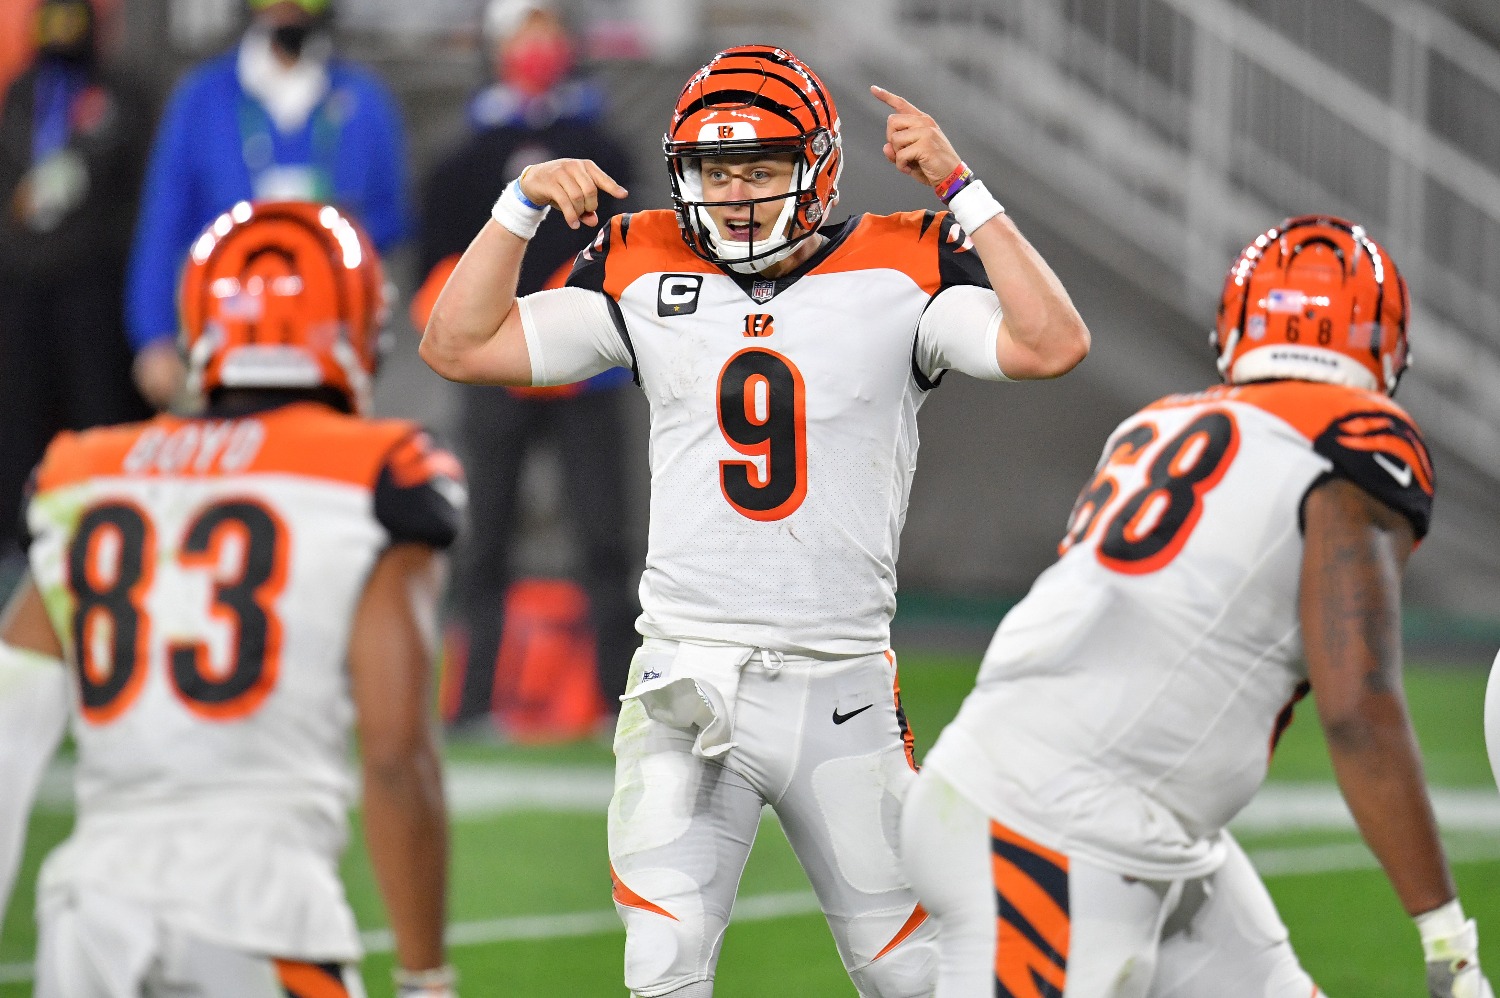 Joe Burrow and the Cincinnati Bengals lost starting TE C.J. Uzomah to a season-ending injury in Thursday night's loss to the Browns.